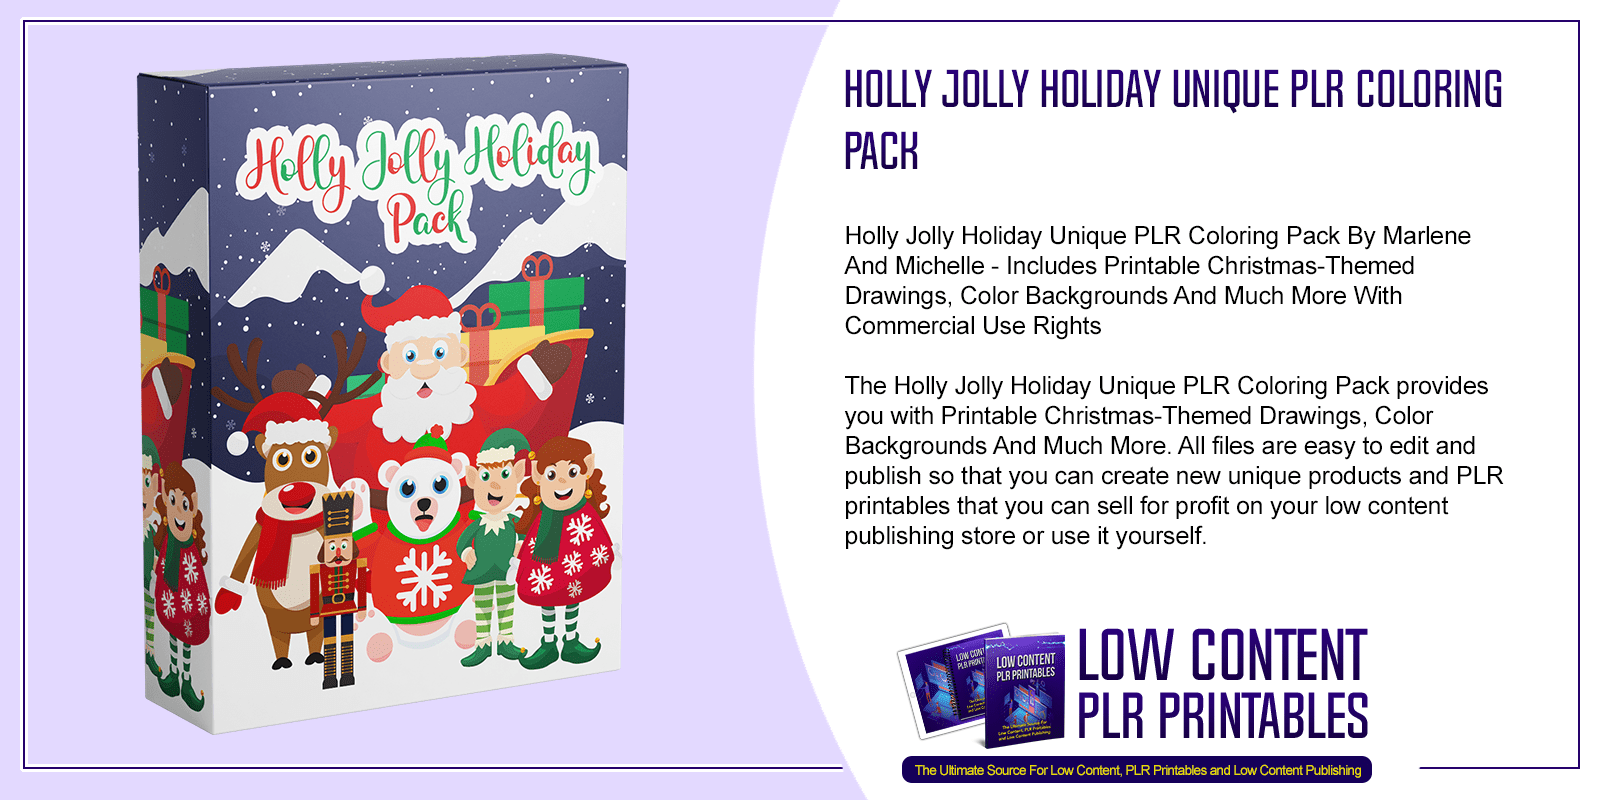 Holly Jolly Holiday Unique PLR Coloring Pack